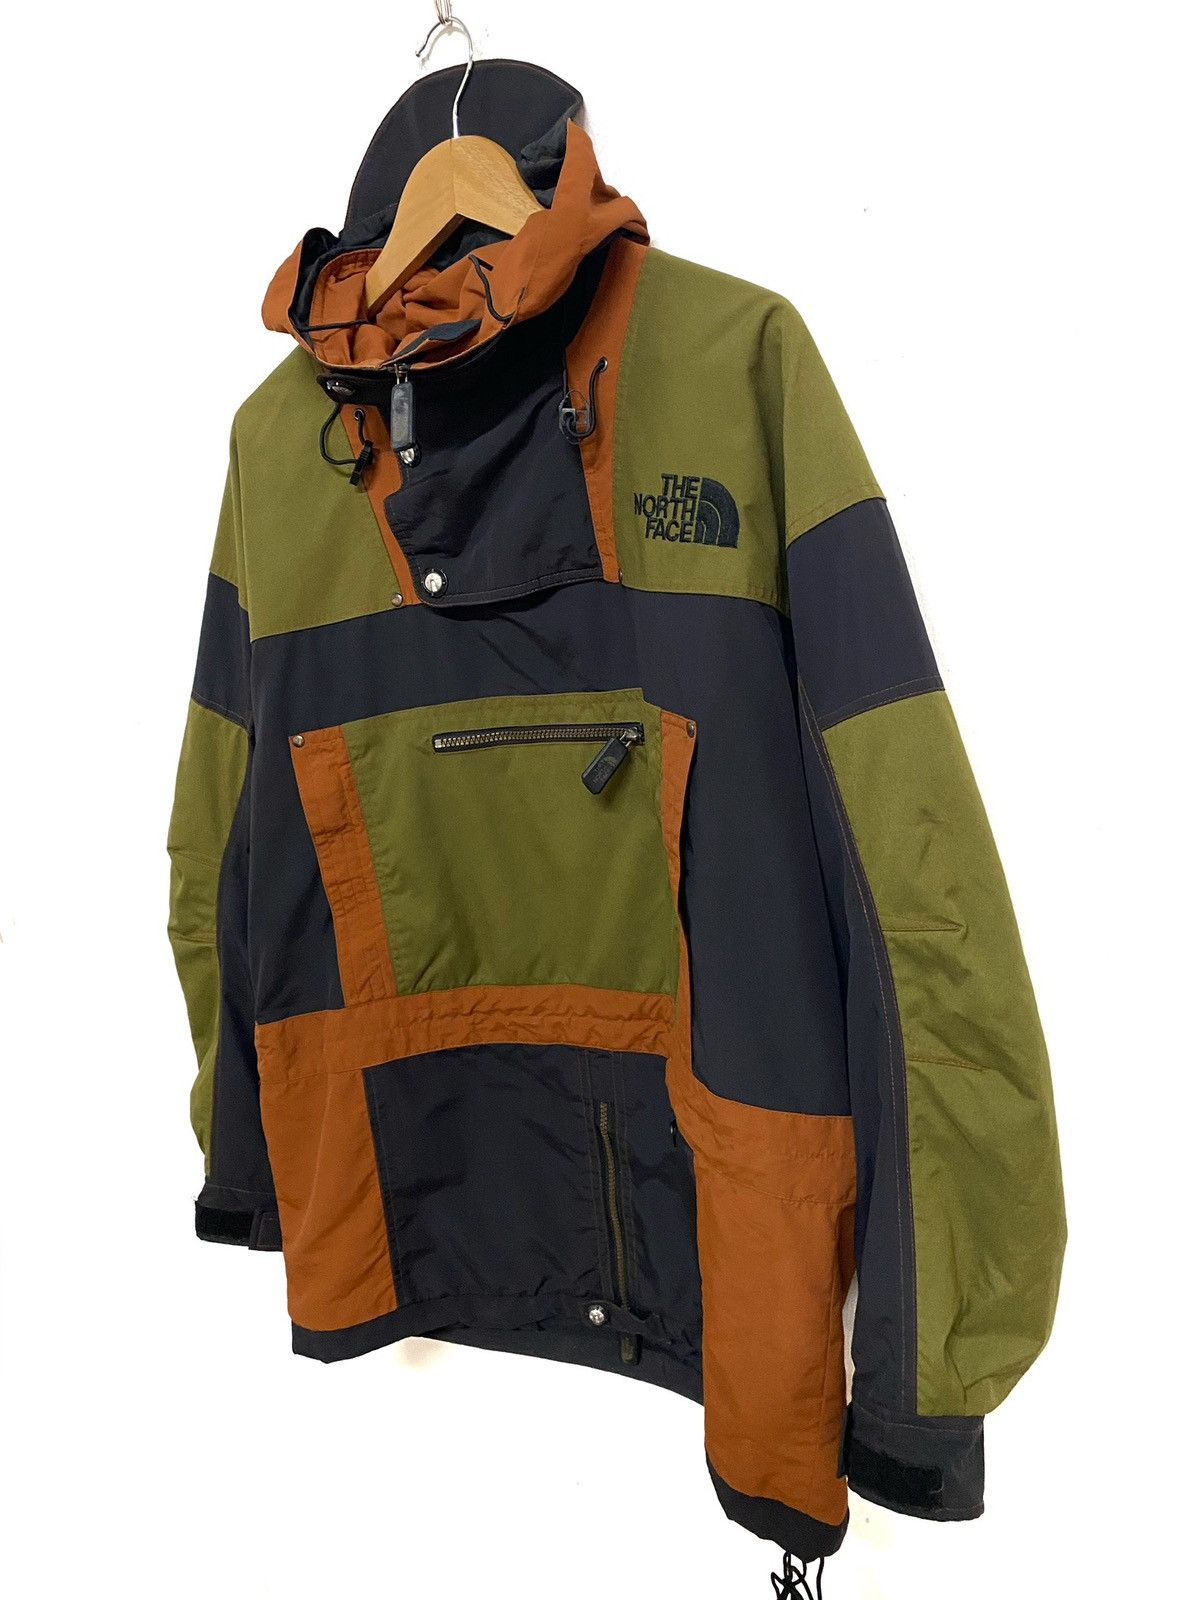 Vintage - 90s The North Face RAGE Ultrex Expedition Colorblock Jacket - 6